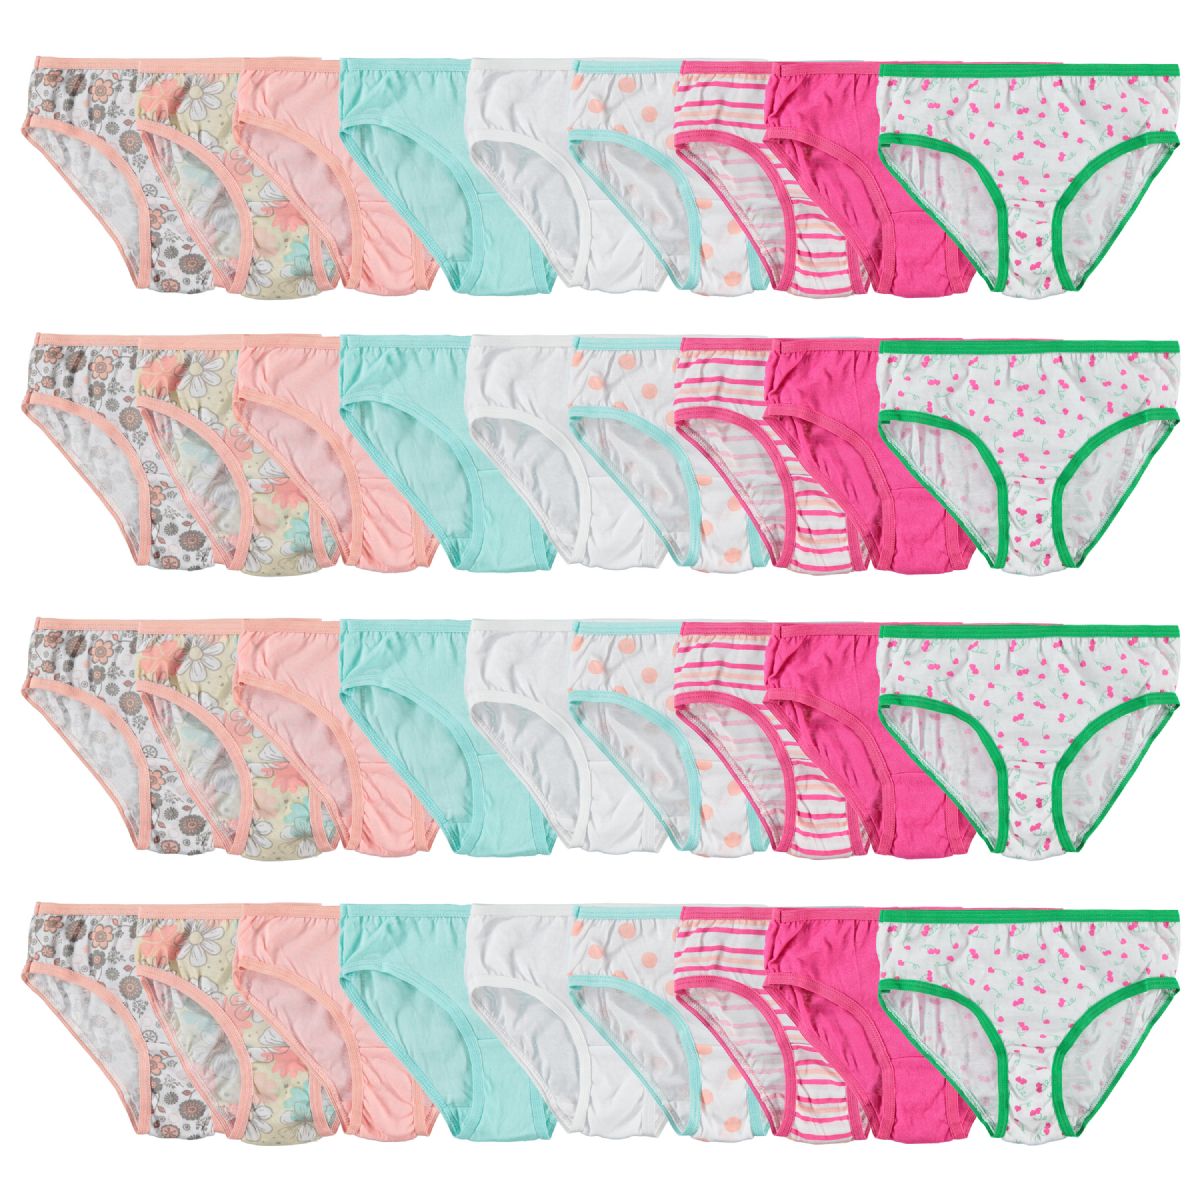 72 Wholesale Girls Cotton Blend Assorted Printed Underwear Size 10 - at 